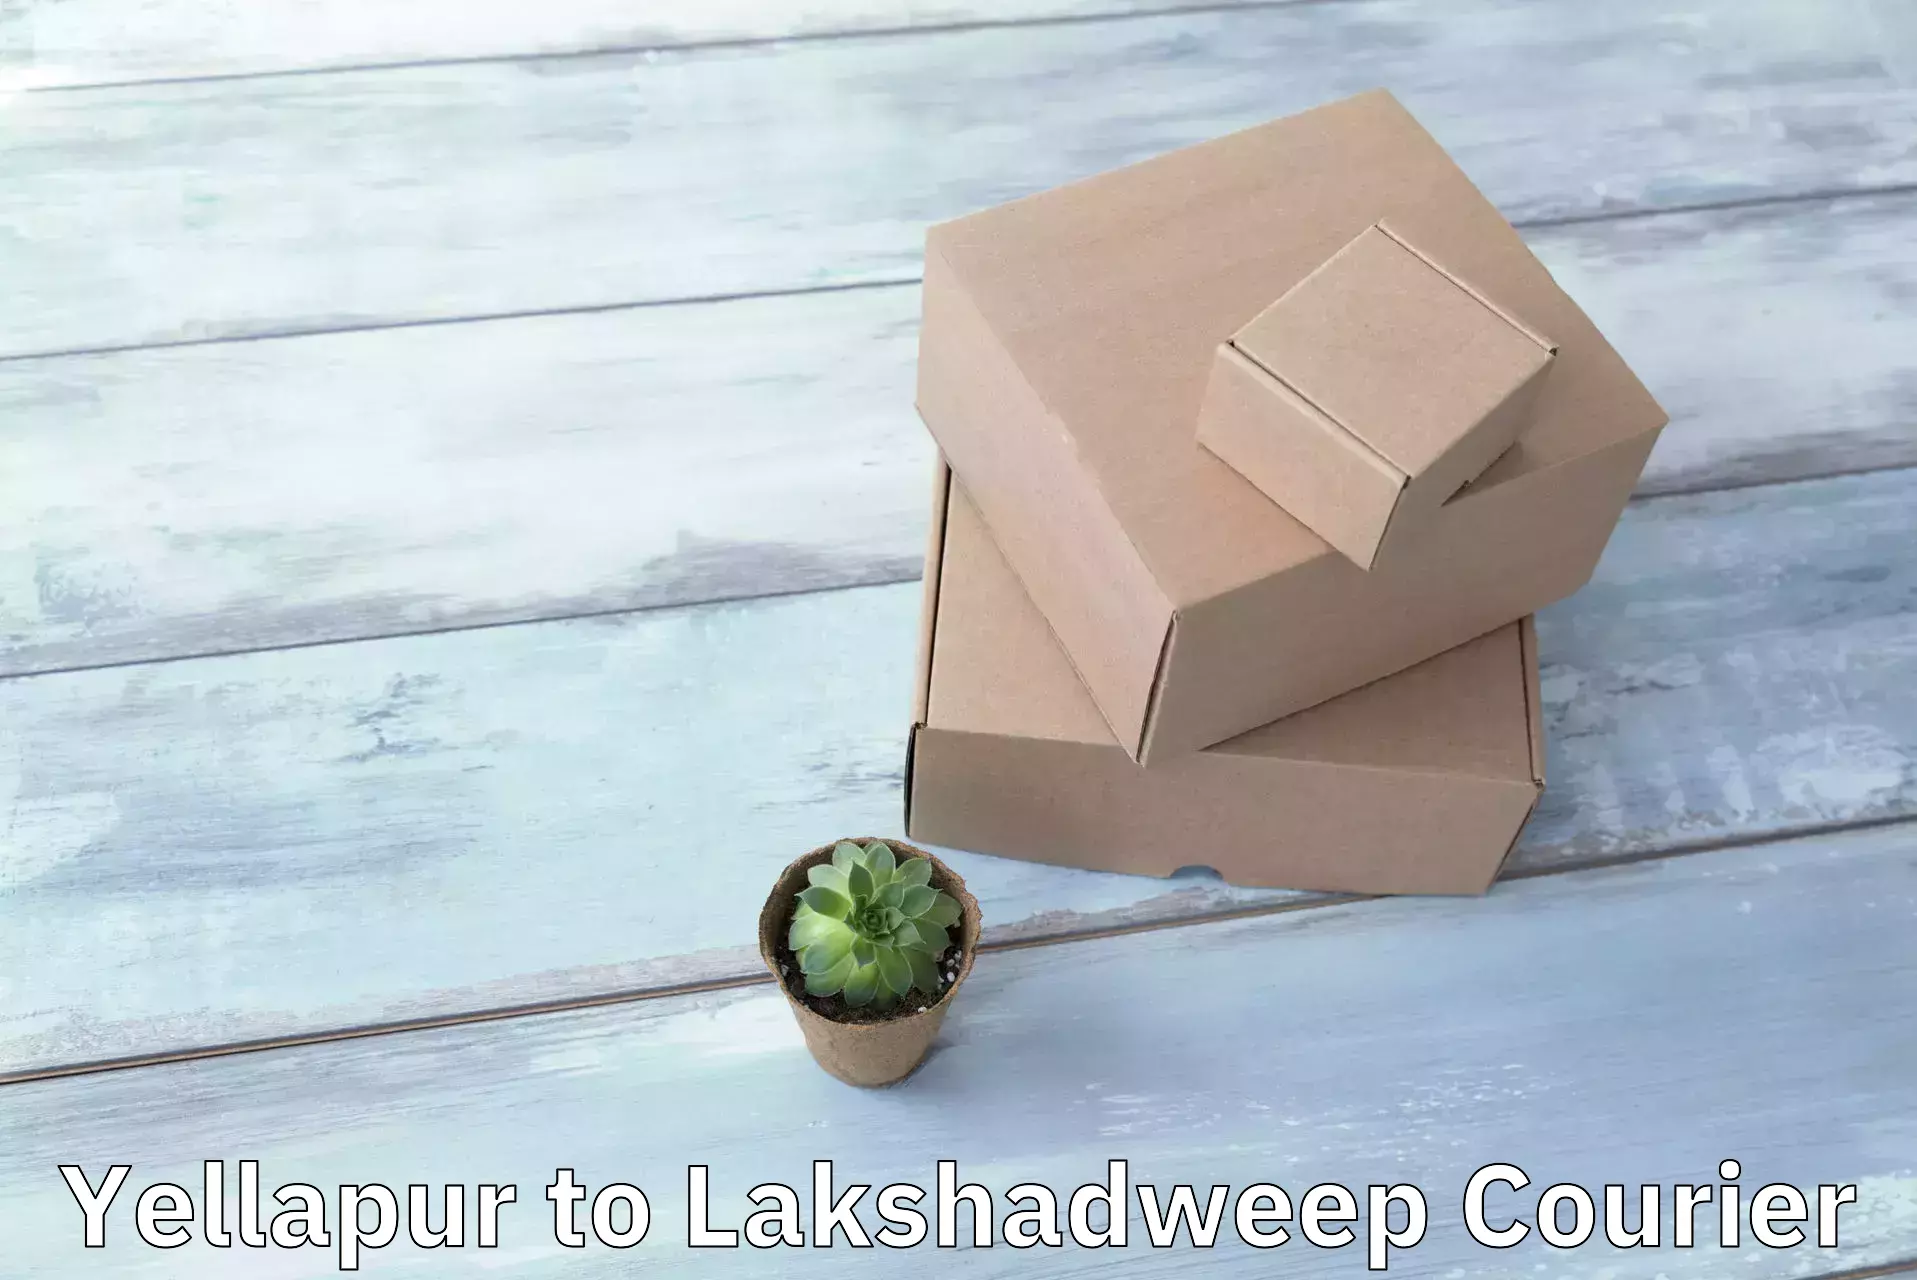 Special handling courier in Yellapur to Lakshadweep